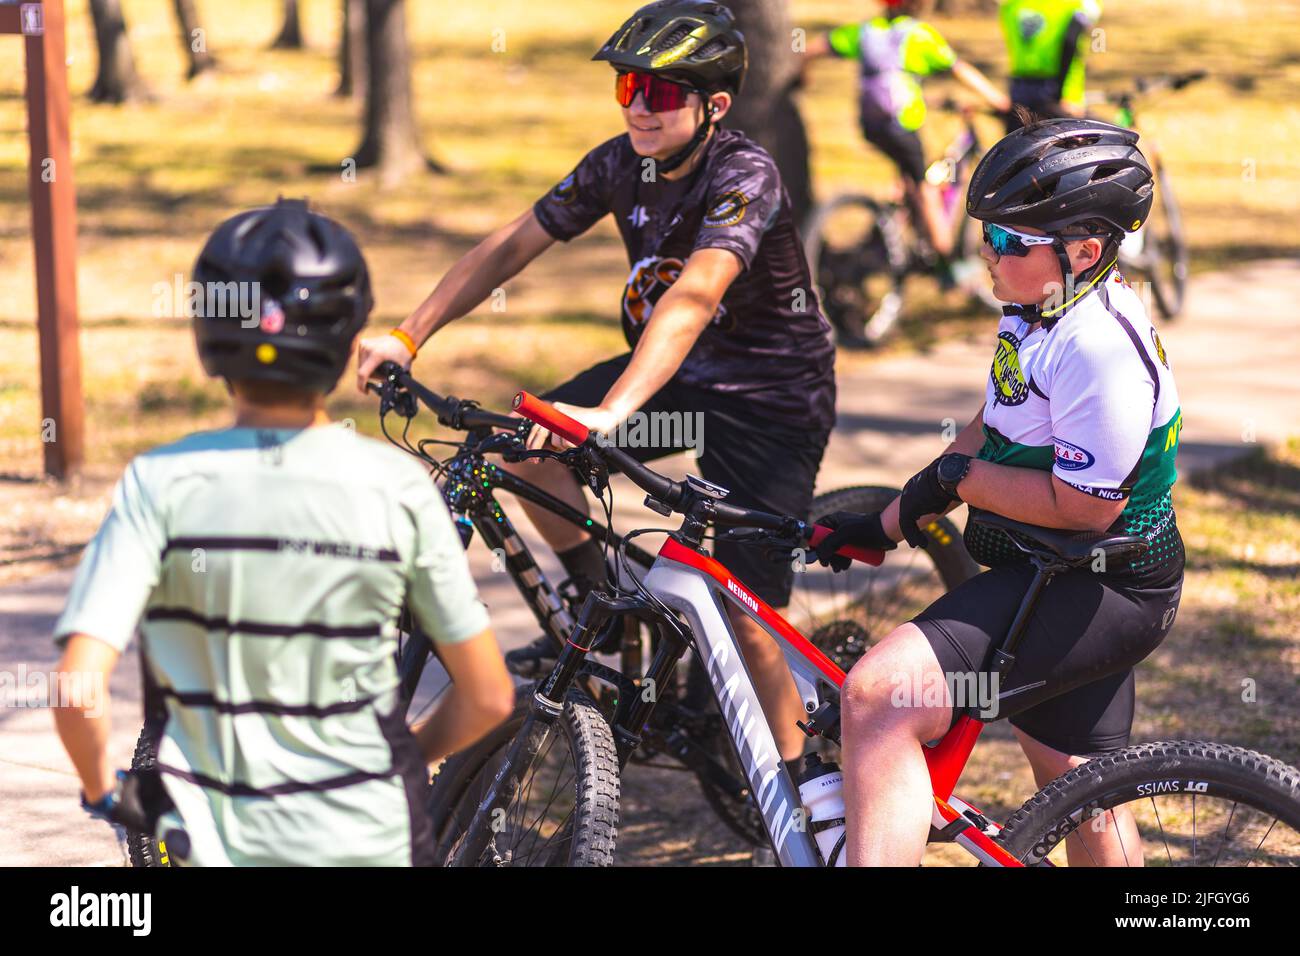 A Caucasian boy getting ready to ride a bike in a race held in the DFW metroplex in Texas Stock Photo